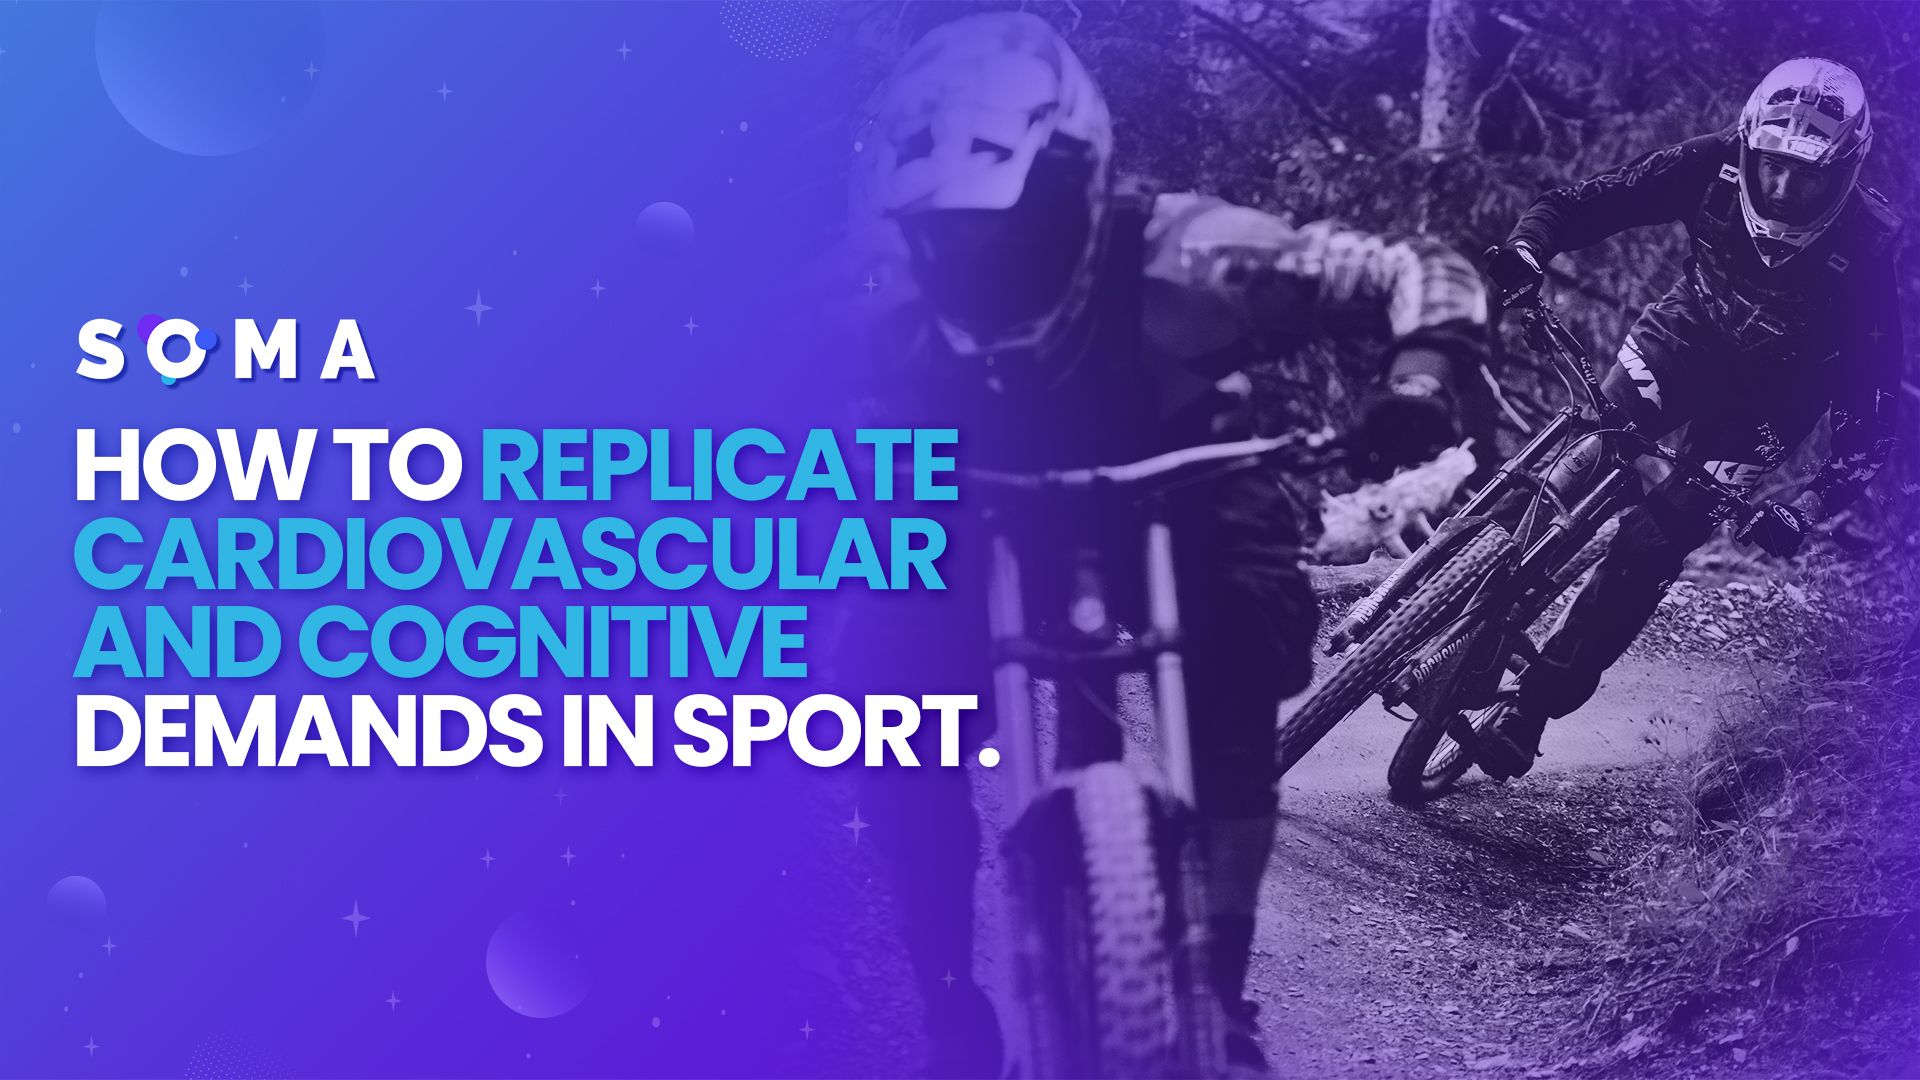 How To Replicate Cardiovascular And Cognitive Demands in Sport.